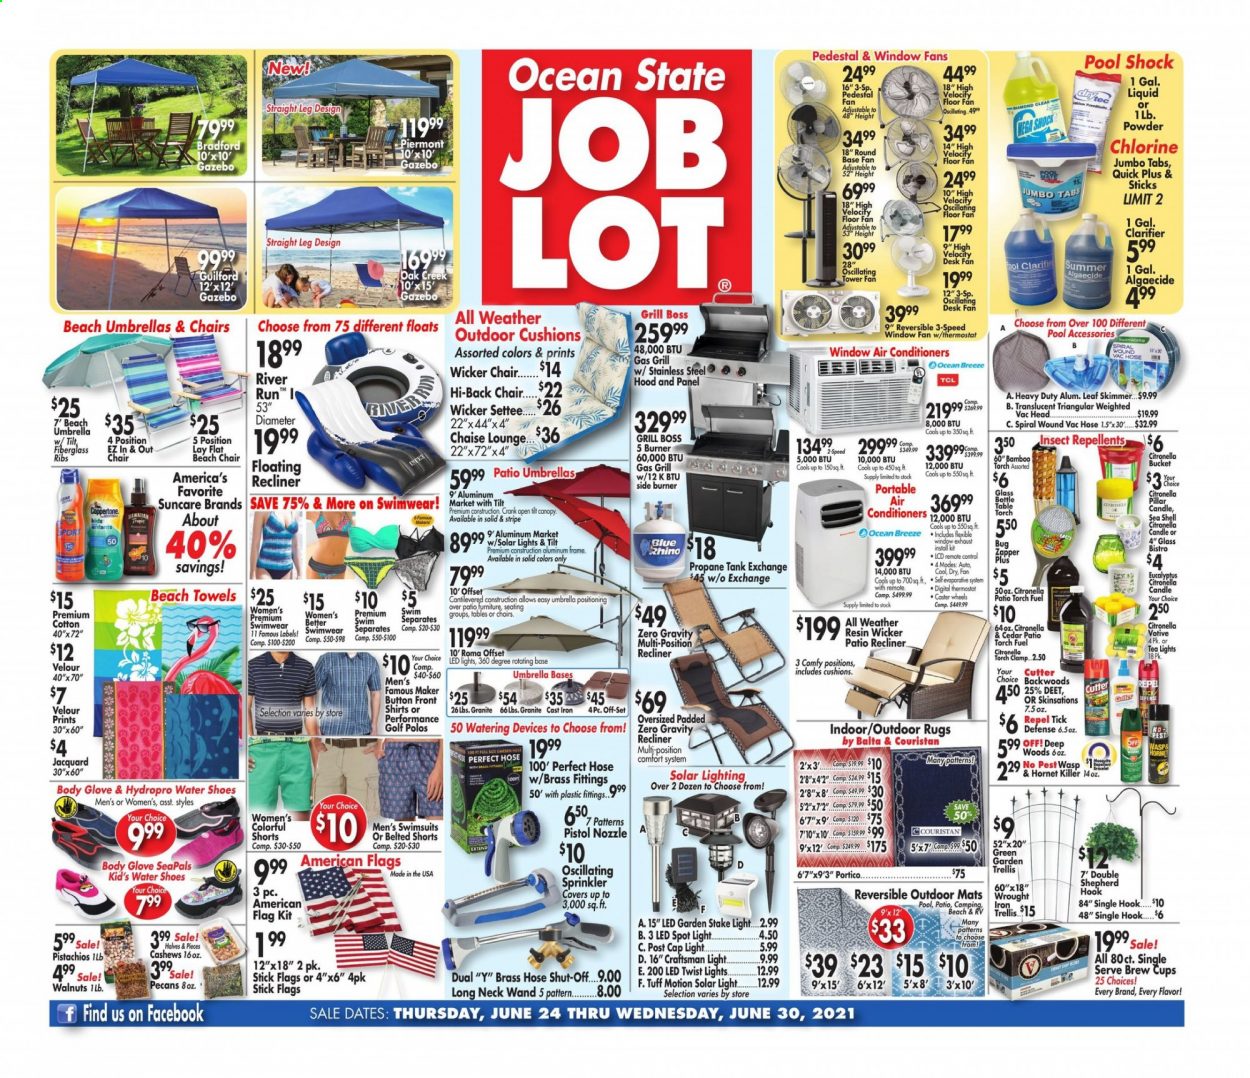 thumbnail - Ocean State Job Lot Flyer - 06/24/2021 - 06/30/2021 - Sales products - shoes, water shoes, cup, glass bottle, candle, spotlight, cushion, beach towel, tank, TCL, remote control, air conditioner, stand fan, desk fan, window fan, shorts, shirt, gloves, umbrella, swimming suit, torch, pistol, LED light, solar light, rug, hook, Craftsman, propane tank, gazebo, gas grill, grill, pool, Intex, garden stake, Shell. Page 1.